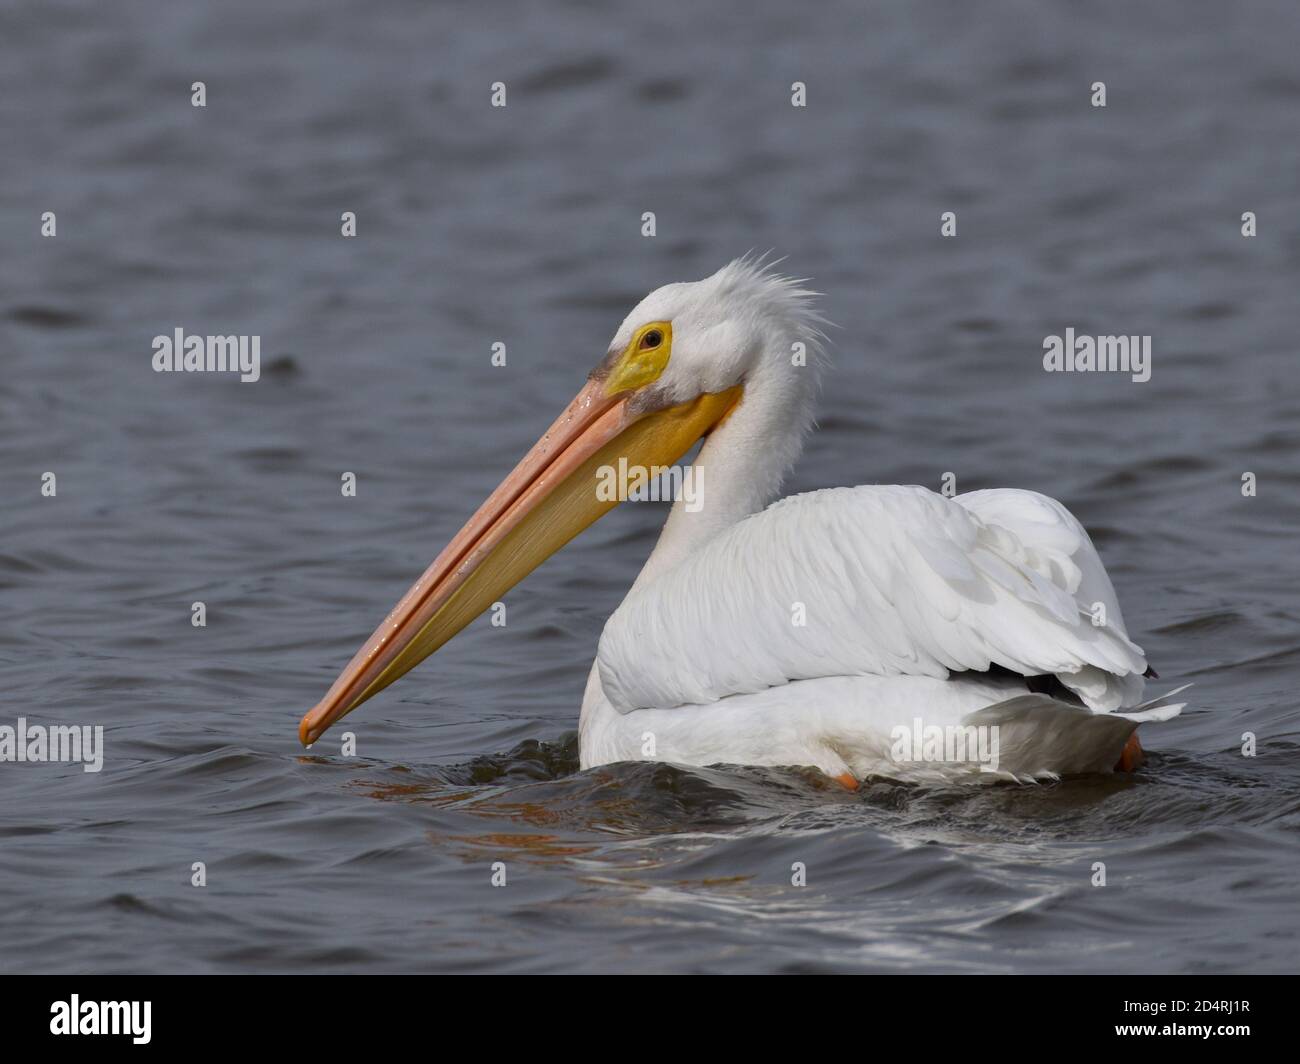 An American white pelican (Pelecanus erythrorhynchos) glances back as it swims on the surface of Harkins Slough, in California Stock Photo